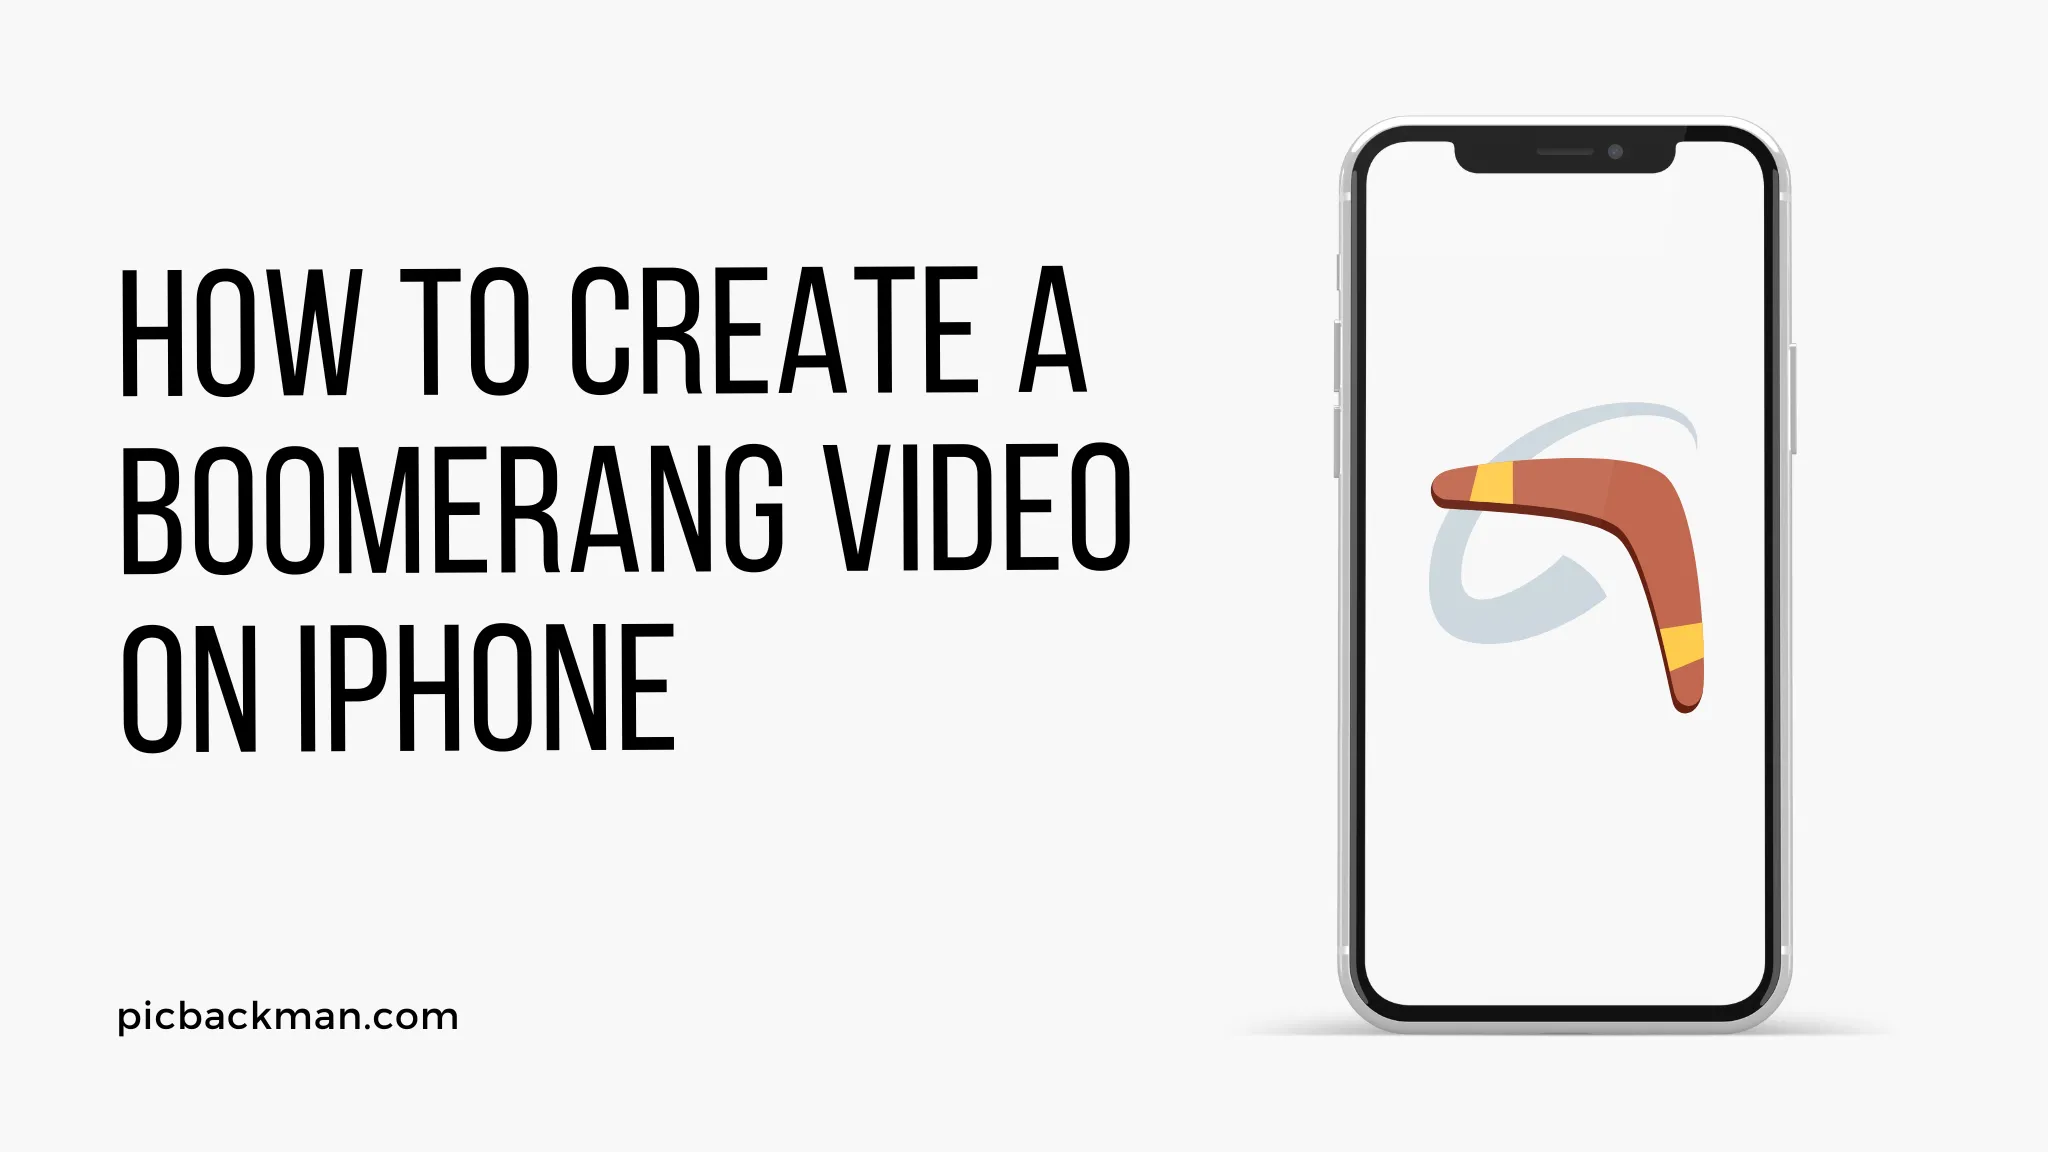 How to create a Boomerang video on iPhone?